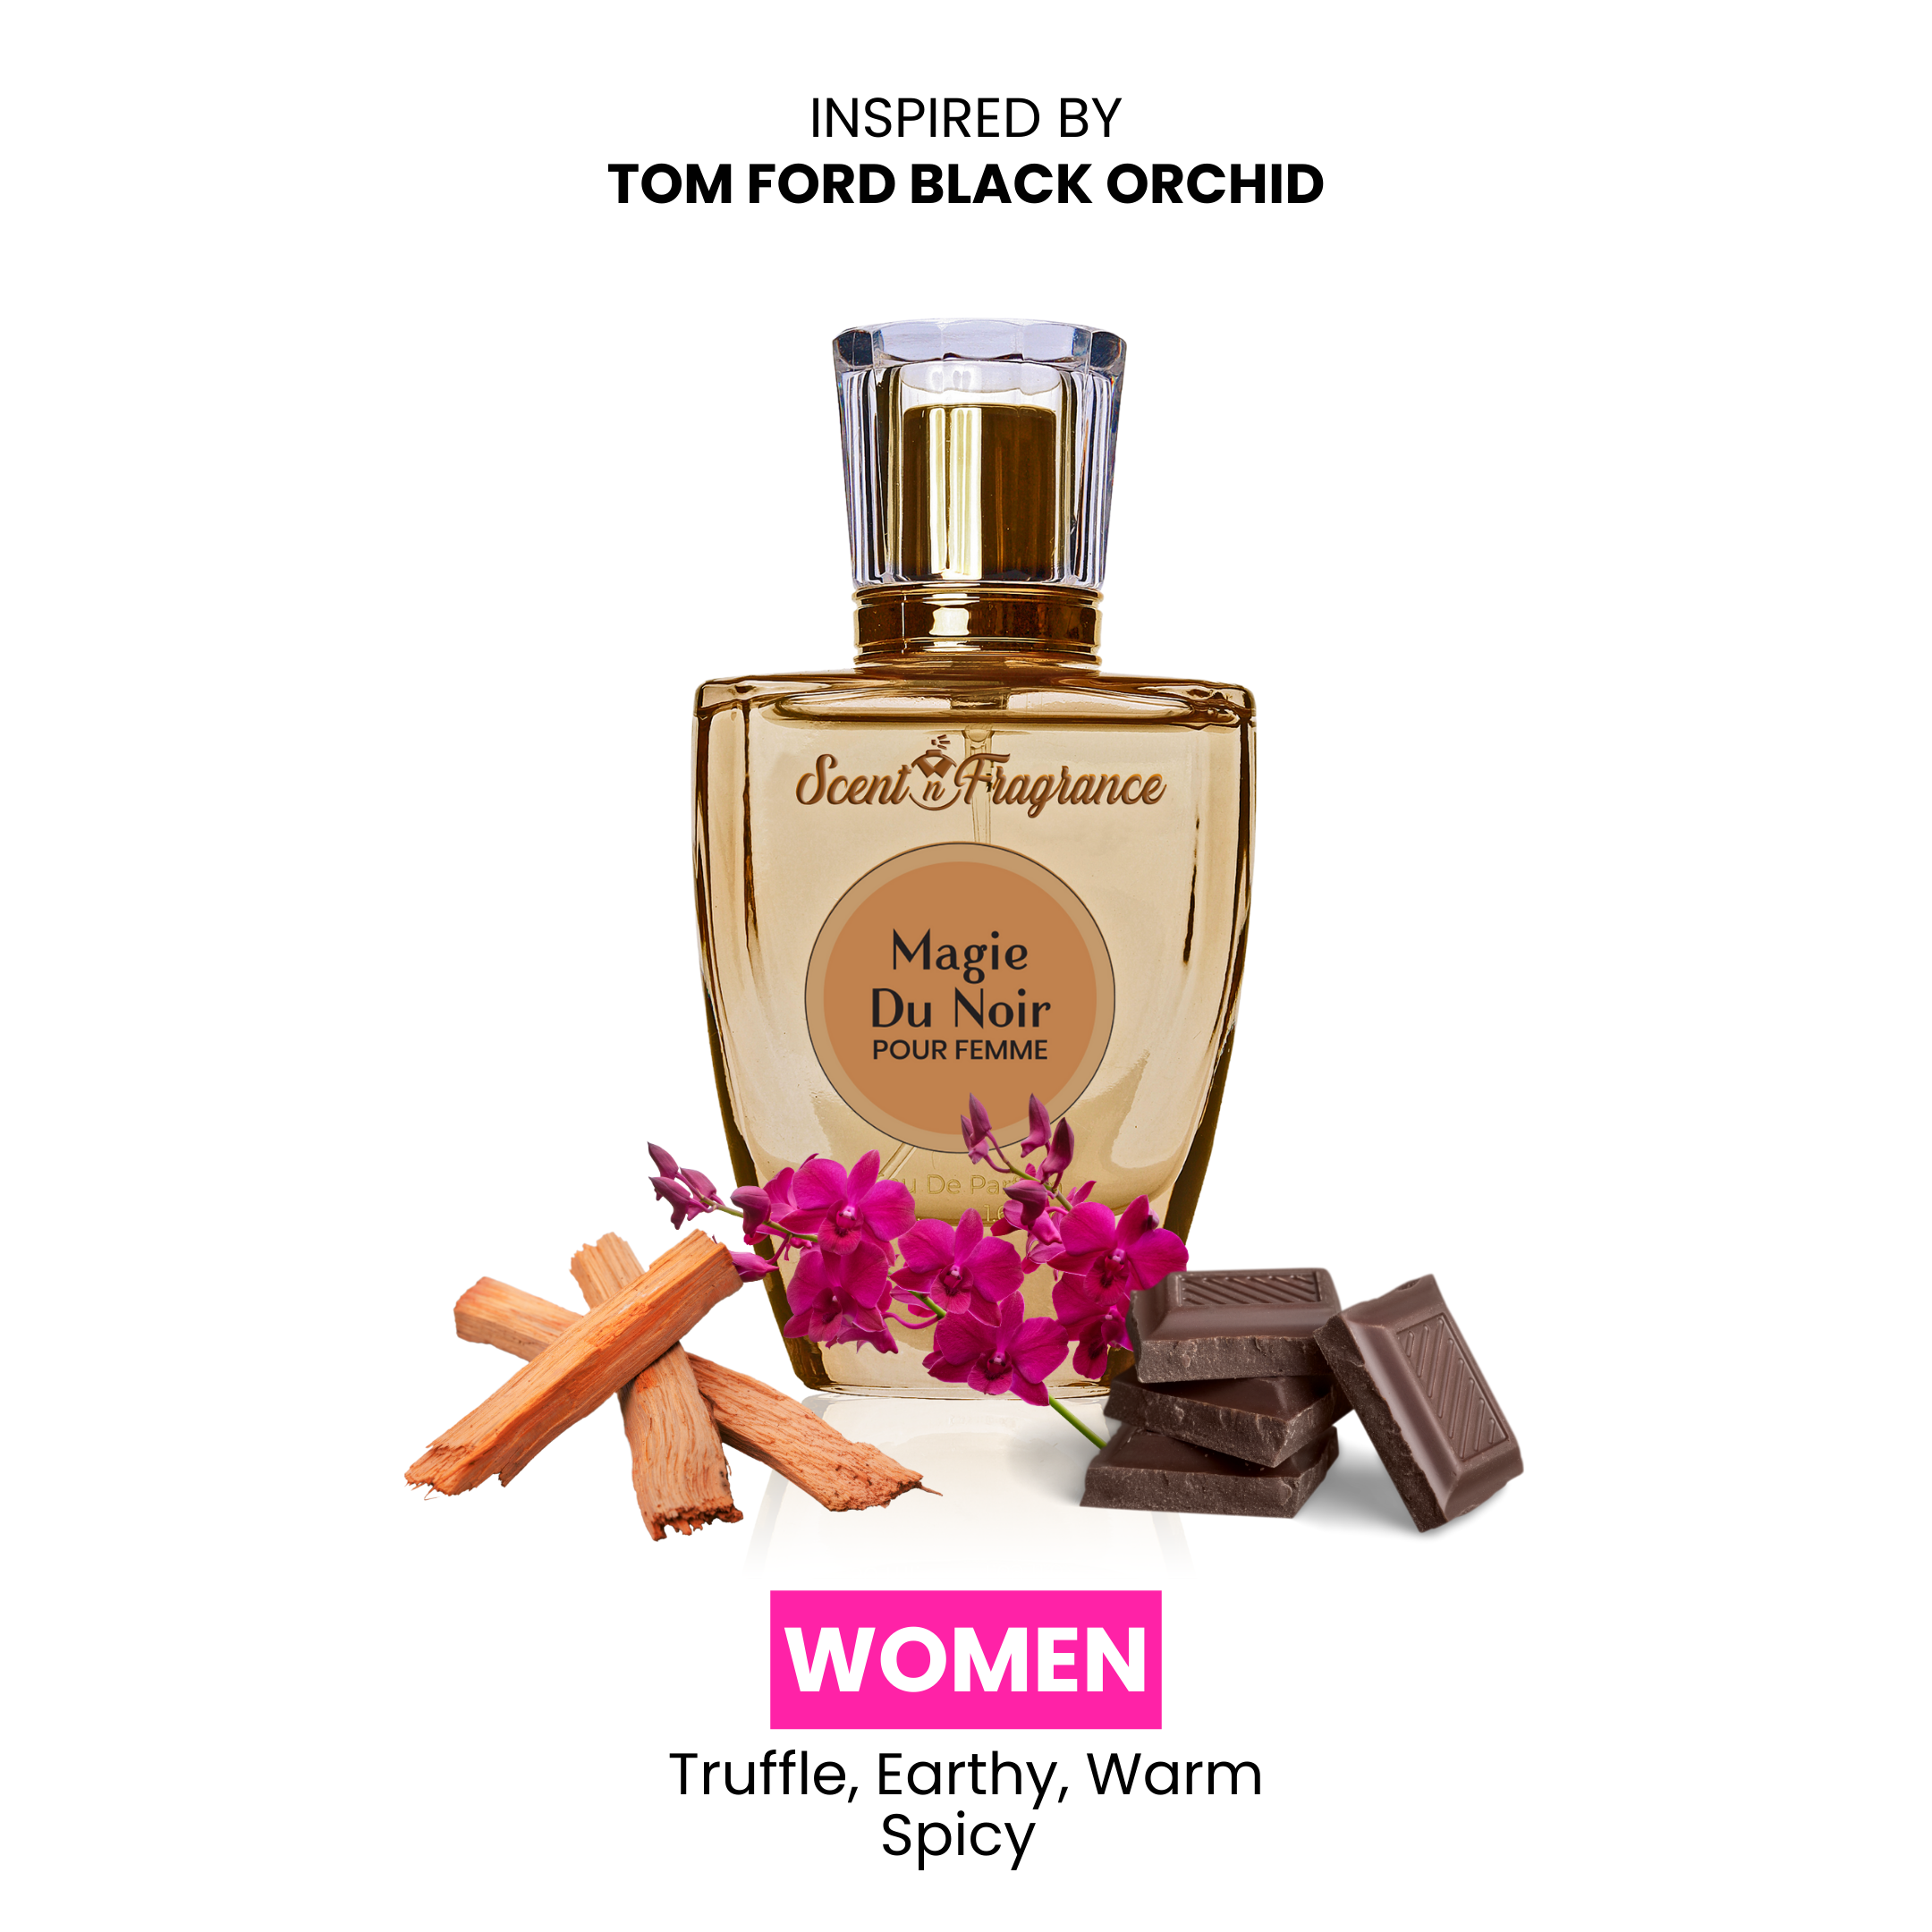 MAGIE DU NOIR - INSPIRED BY TOM FORD BLACK ORCHID by Scent N Fragrance